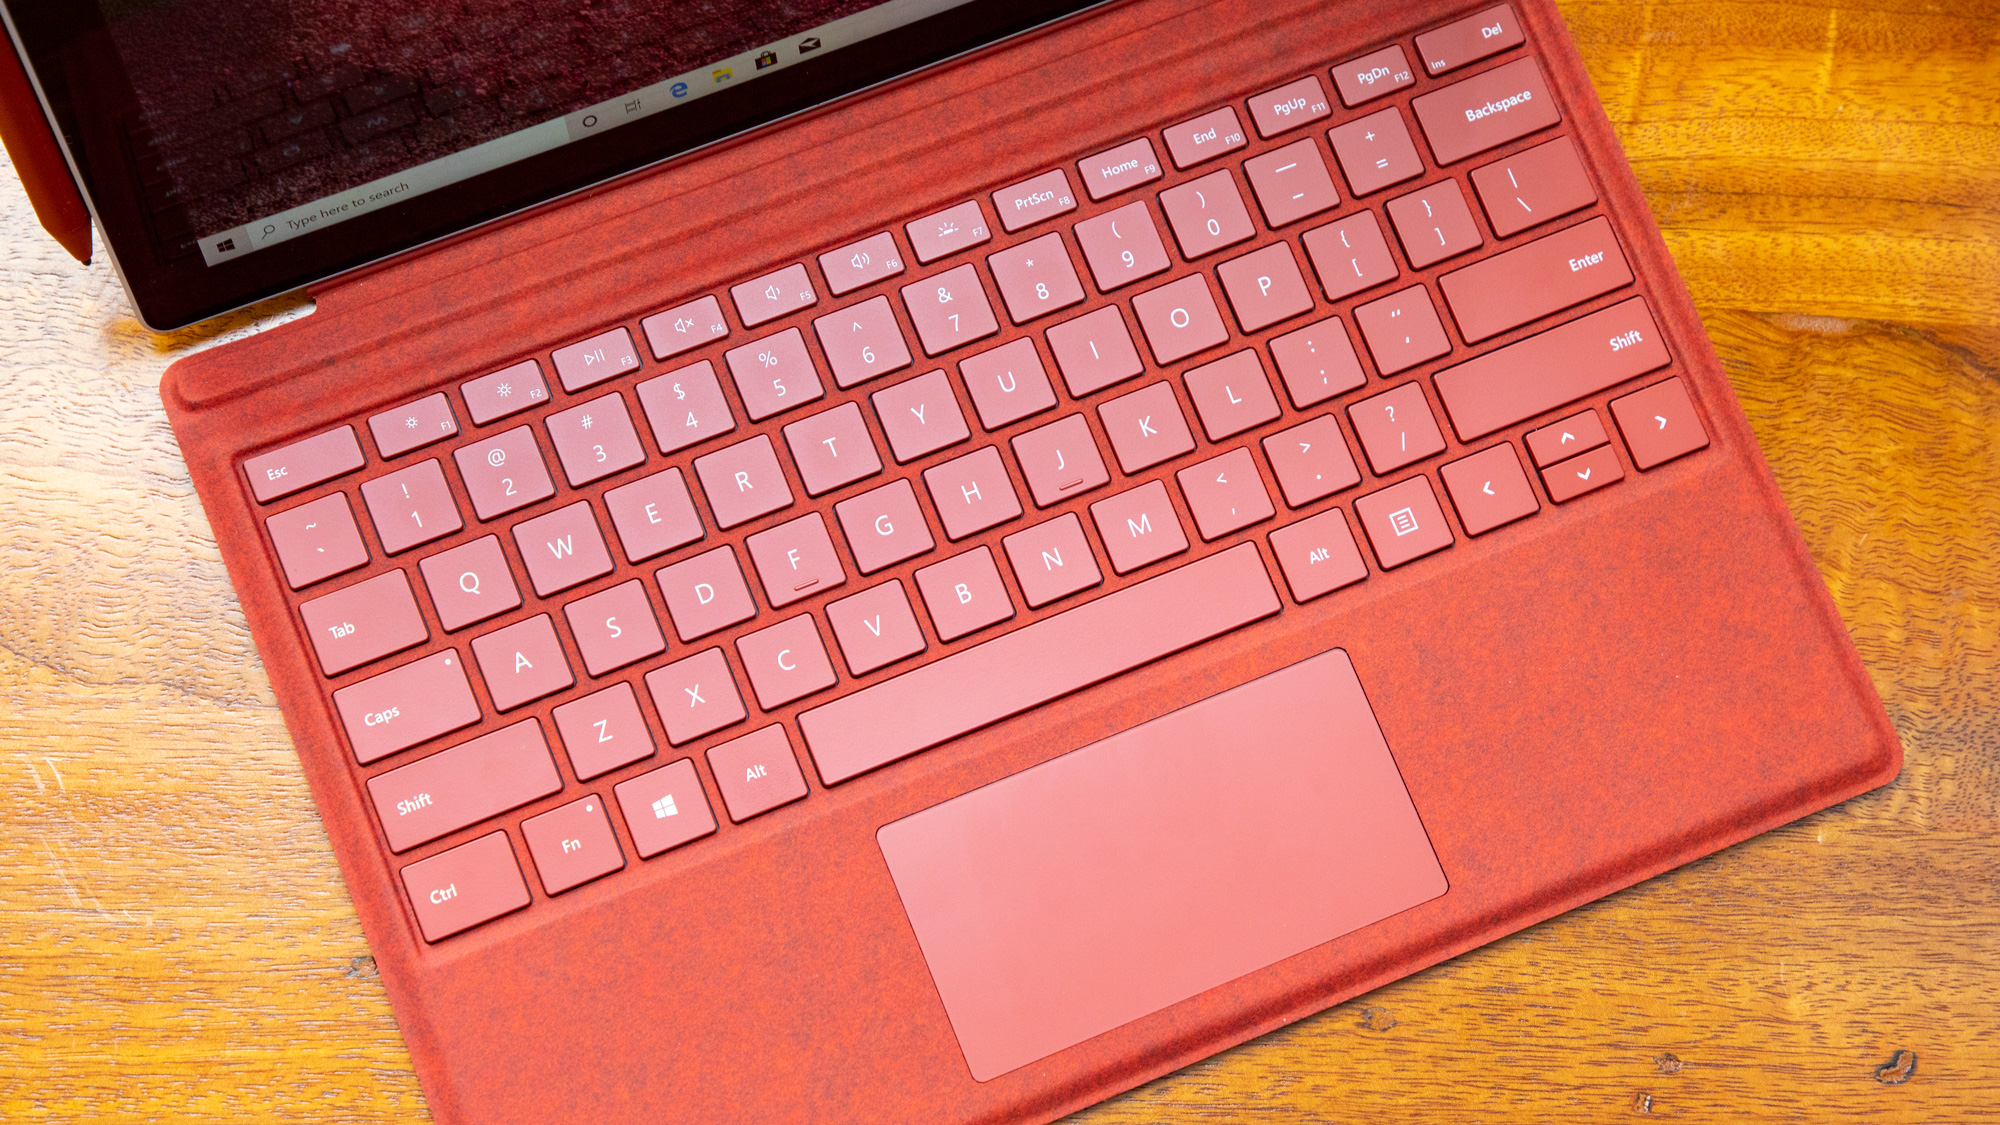 The Type Cover keyboard now has deeper-feeling travel as well as a bouncier feel as our fingers leave the keys.